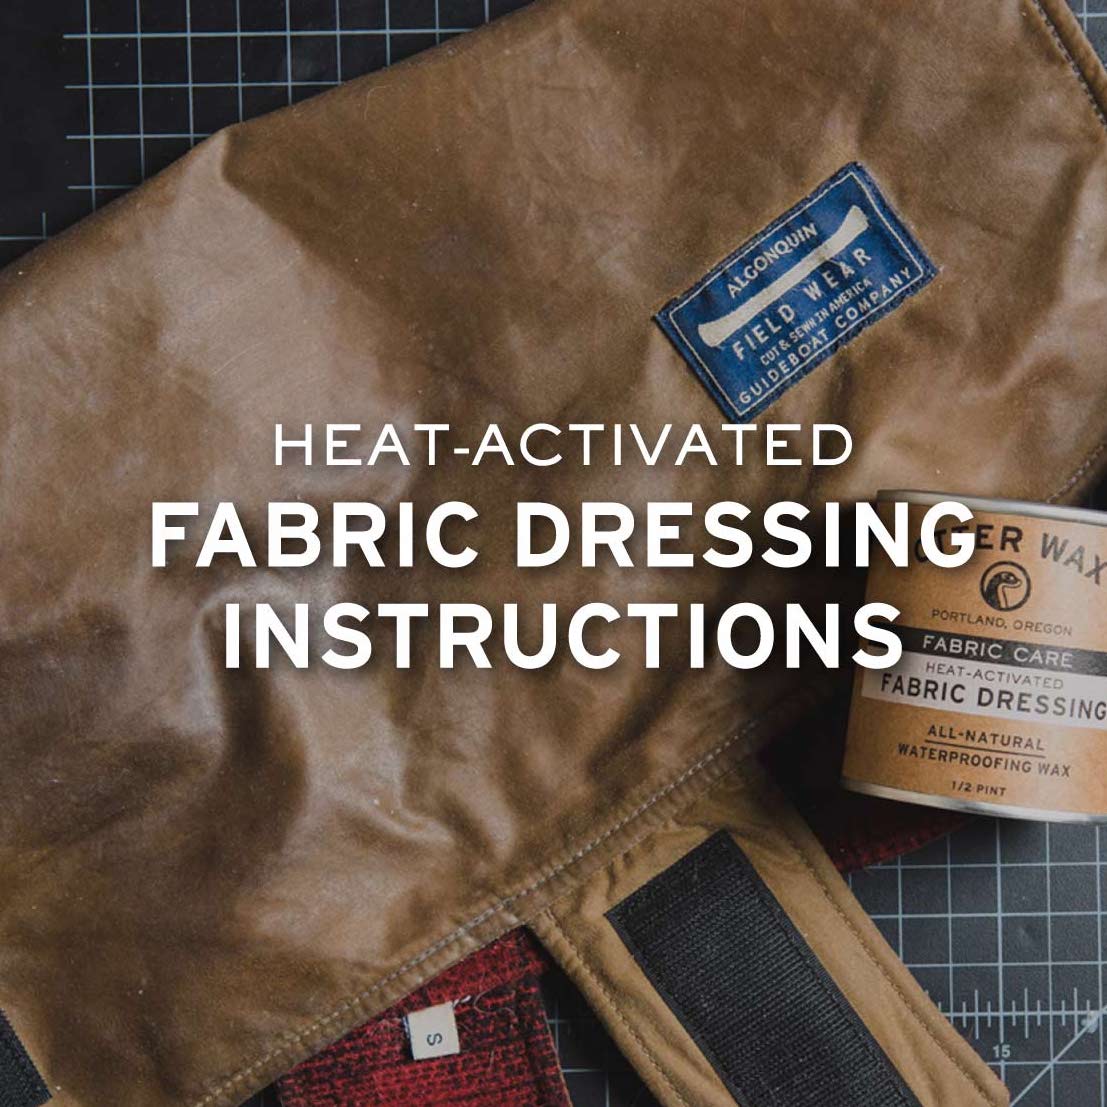 Heat-Activated Fabric Dressing